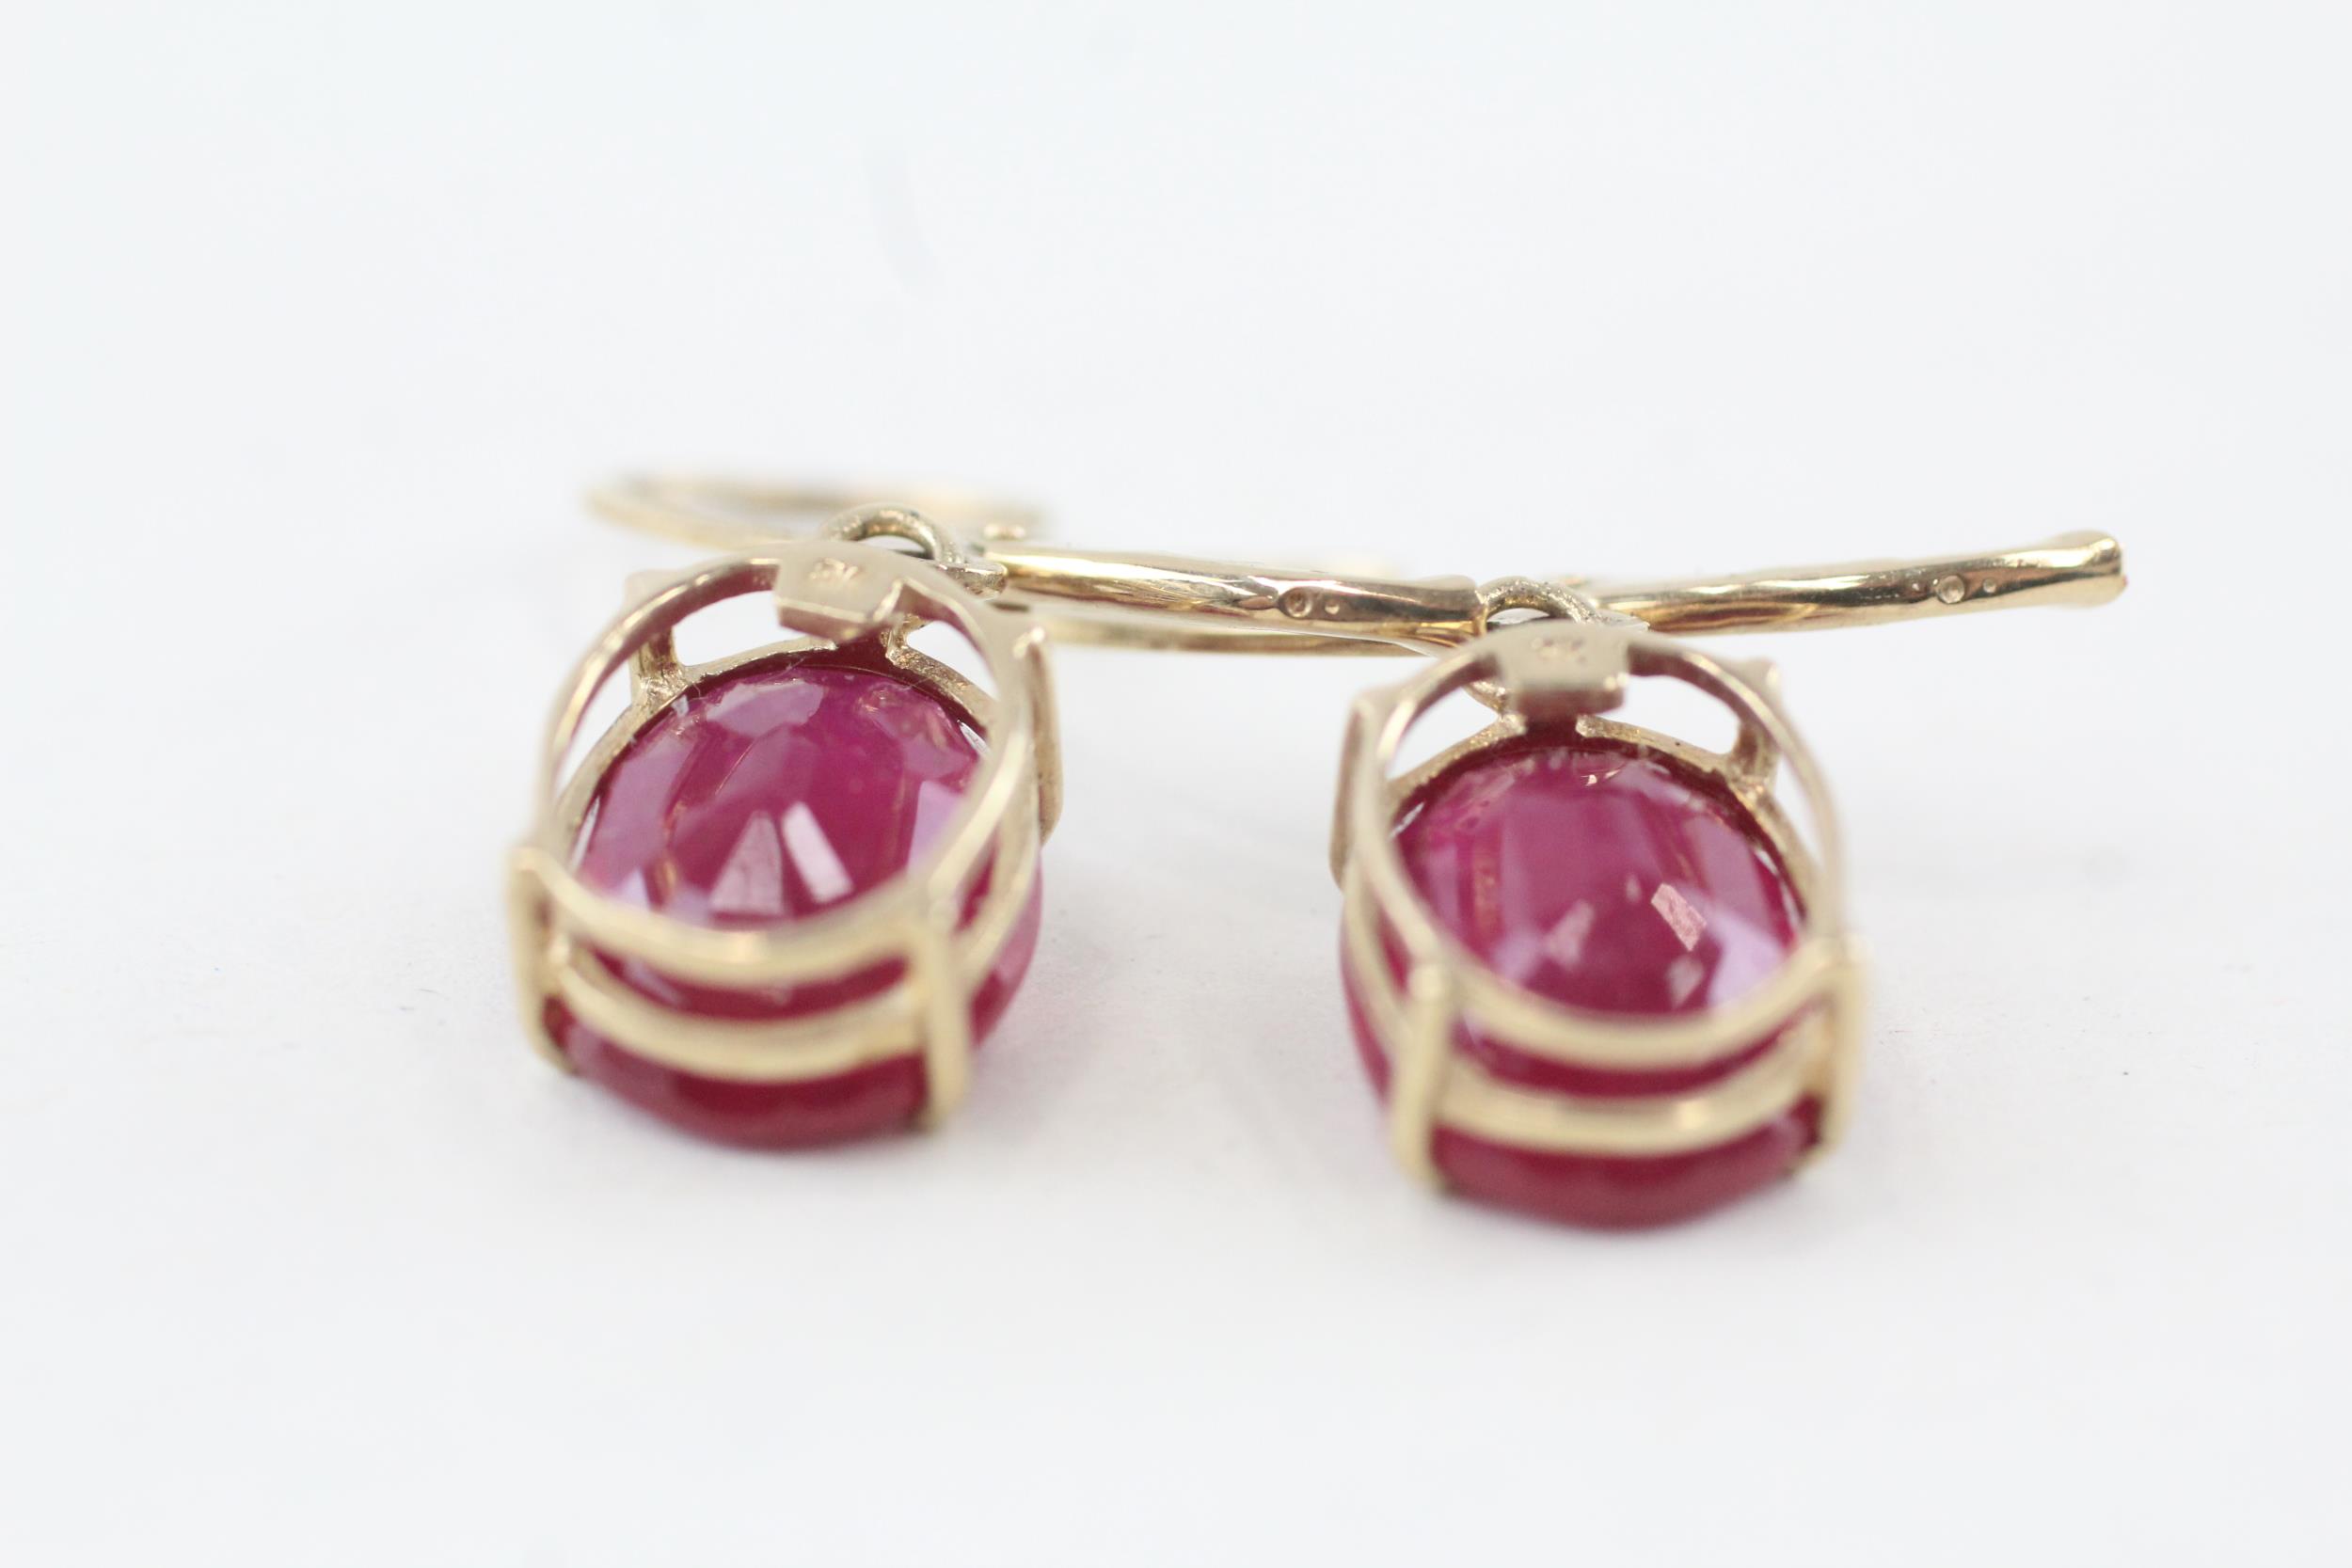 9ct gold enhanced ruby set leverback earrings - 175 g - Image 4 of 4